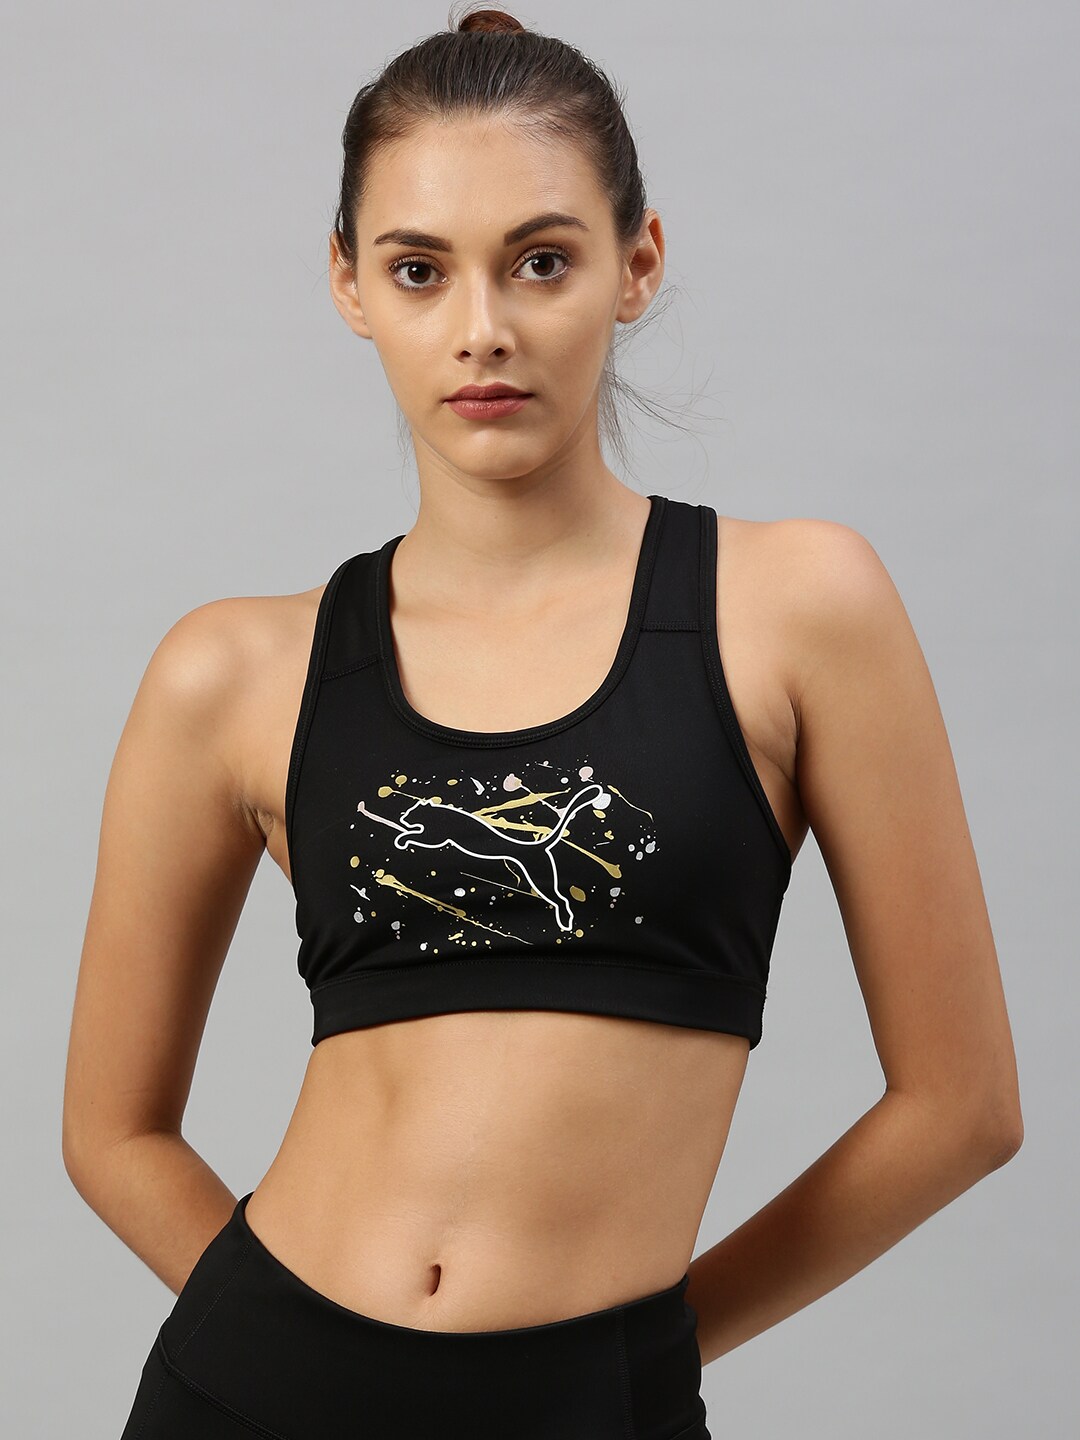 Puma Black Non-Wired Drycell 4Keeps Printed Lightly Padded Training Sports Bra Price in India